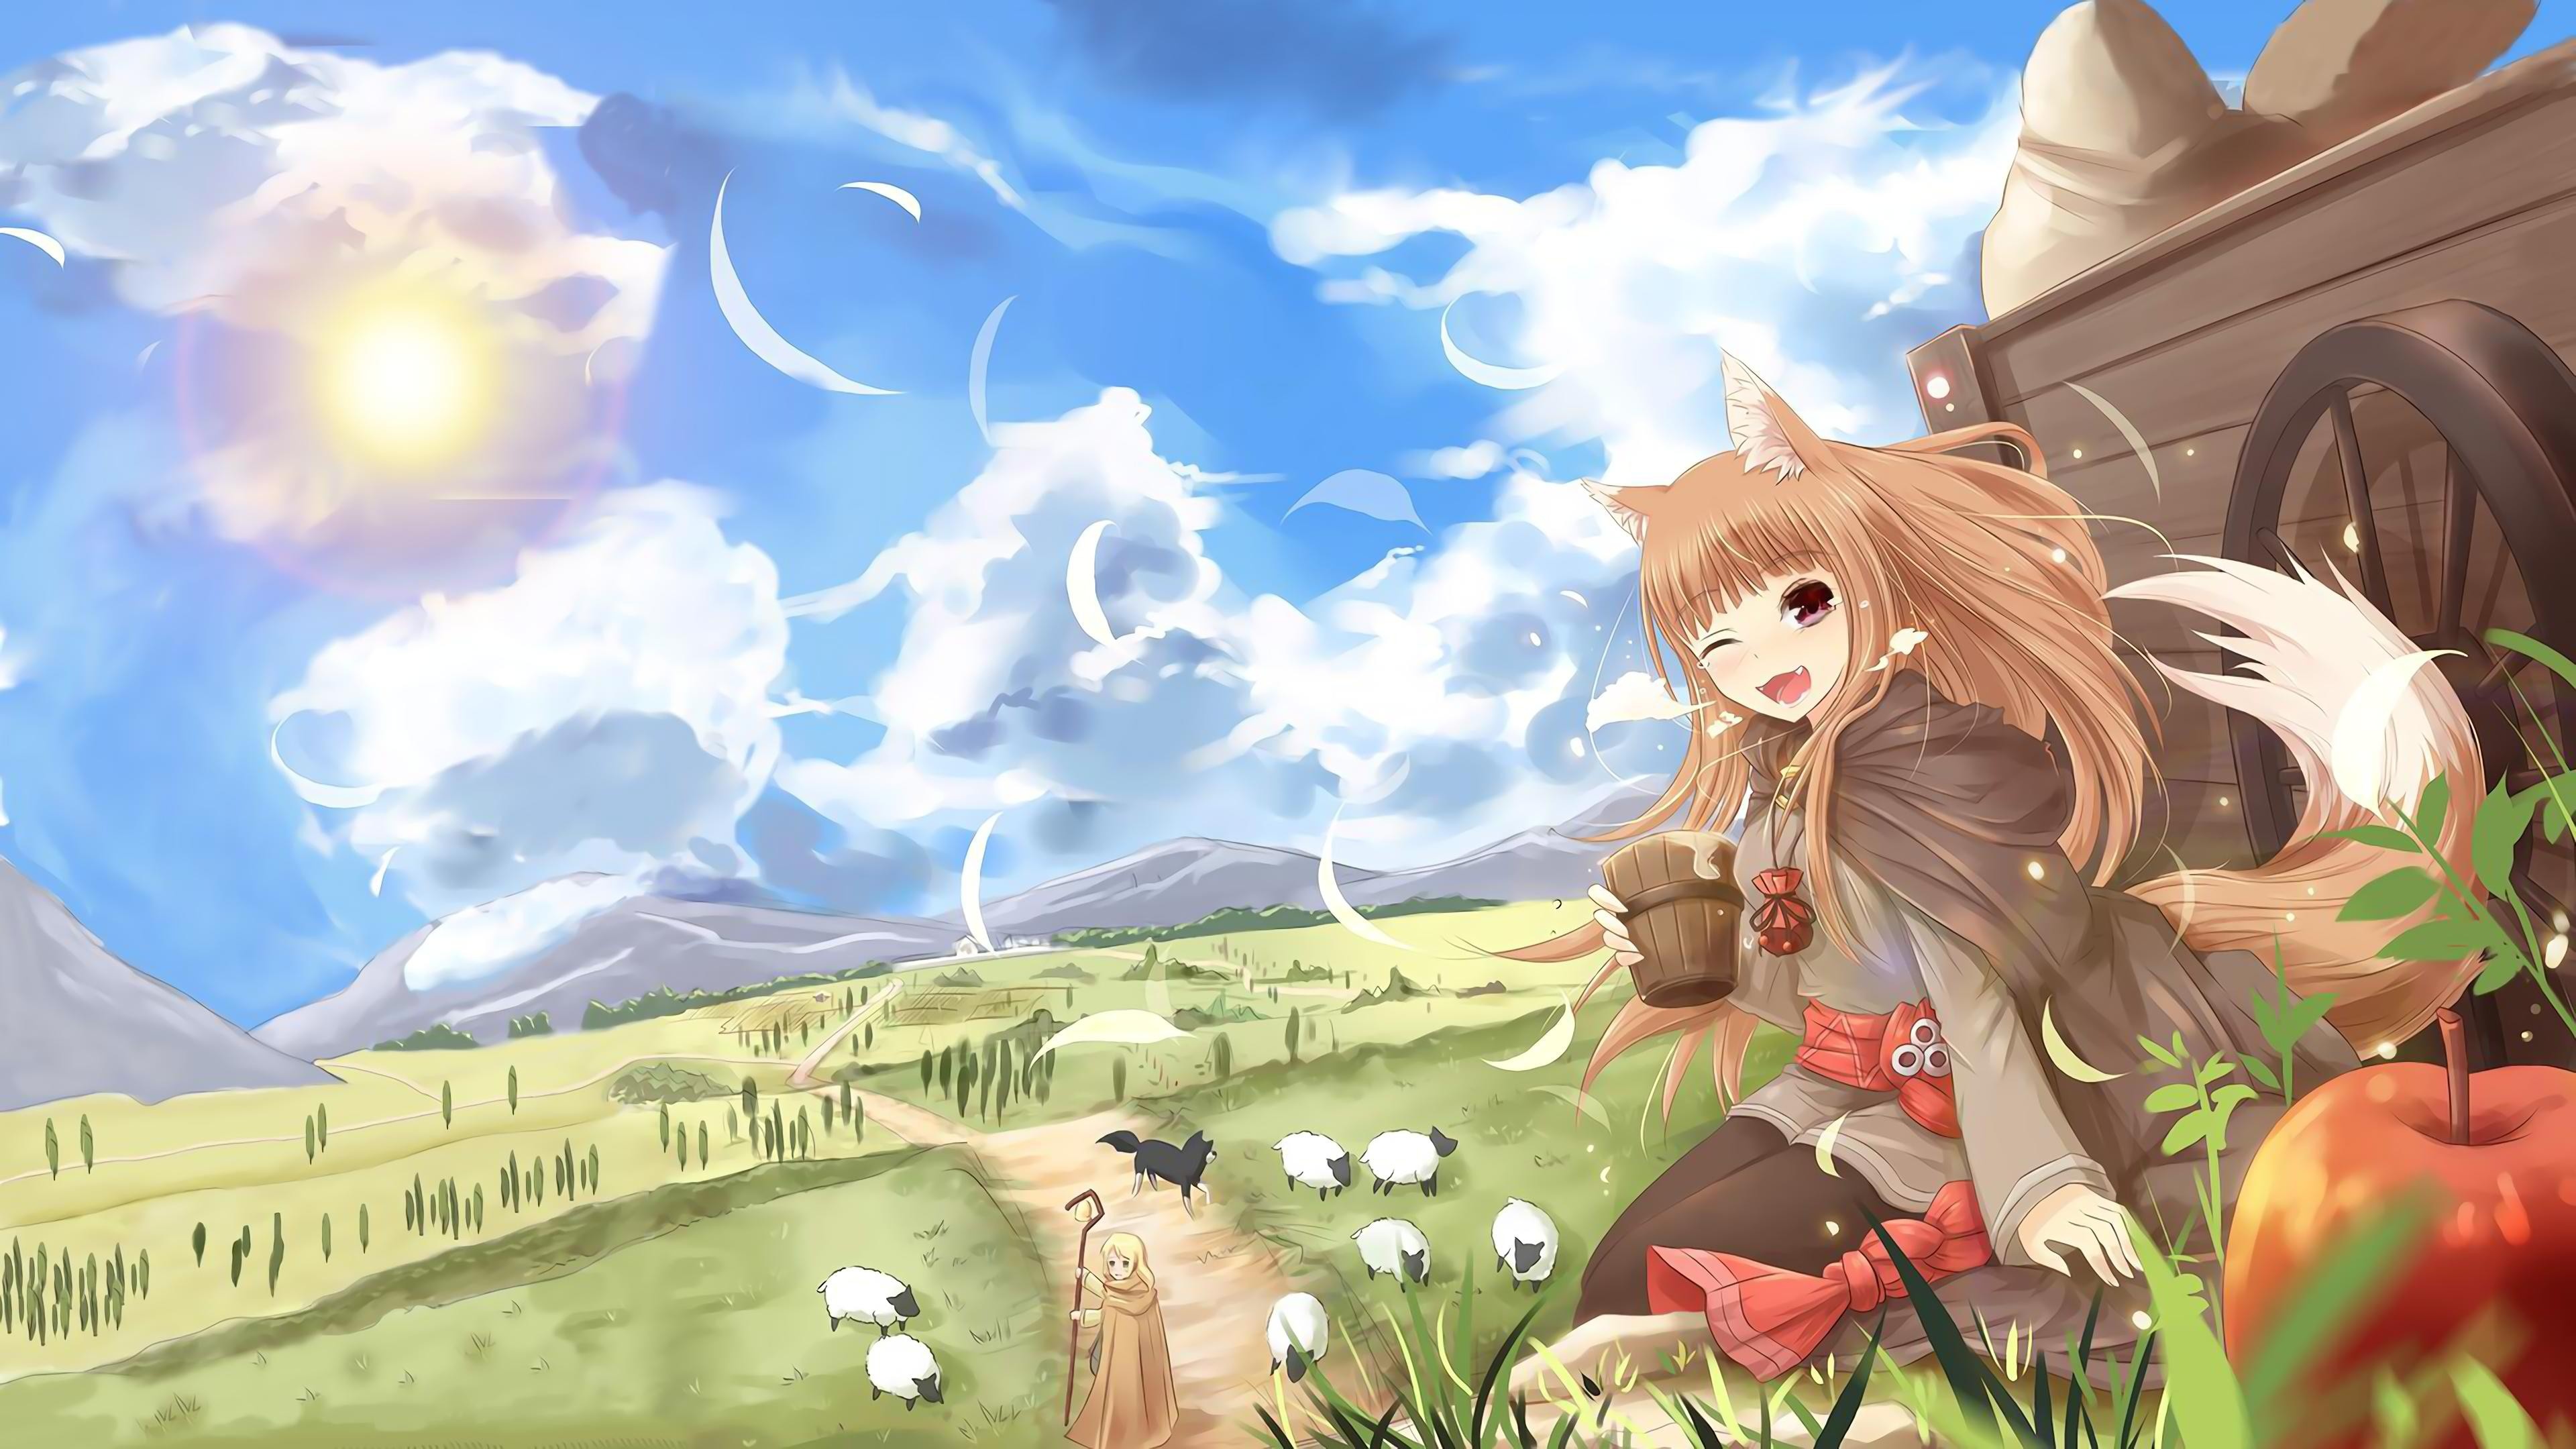 Spice and Wolf (Anime): Animal Ears, Holo, Anime Girls. 3840x2160 4K Background.